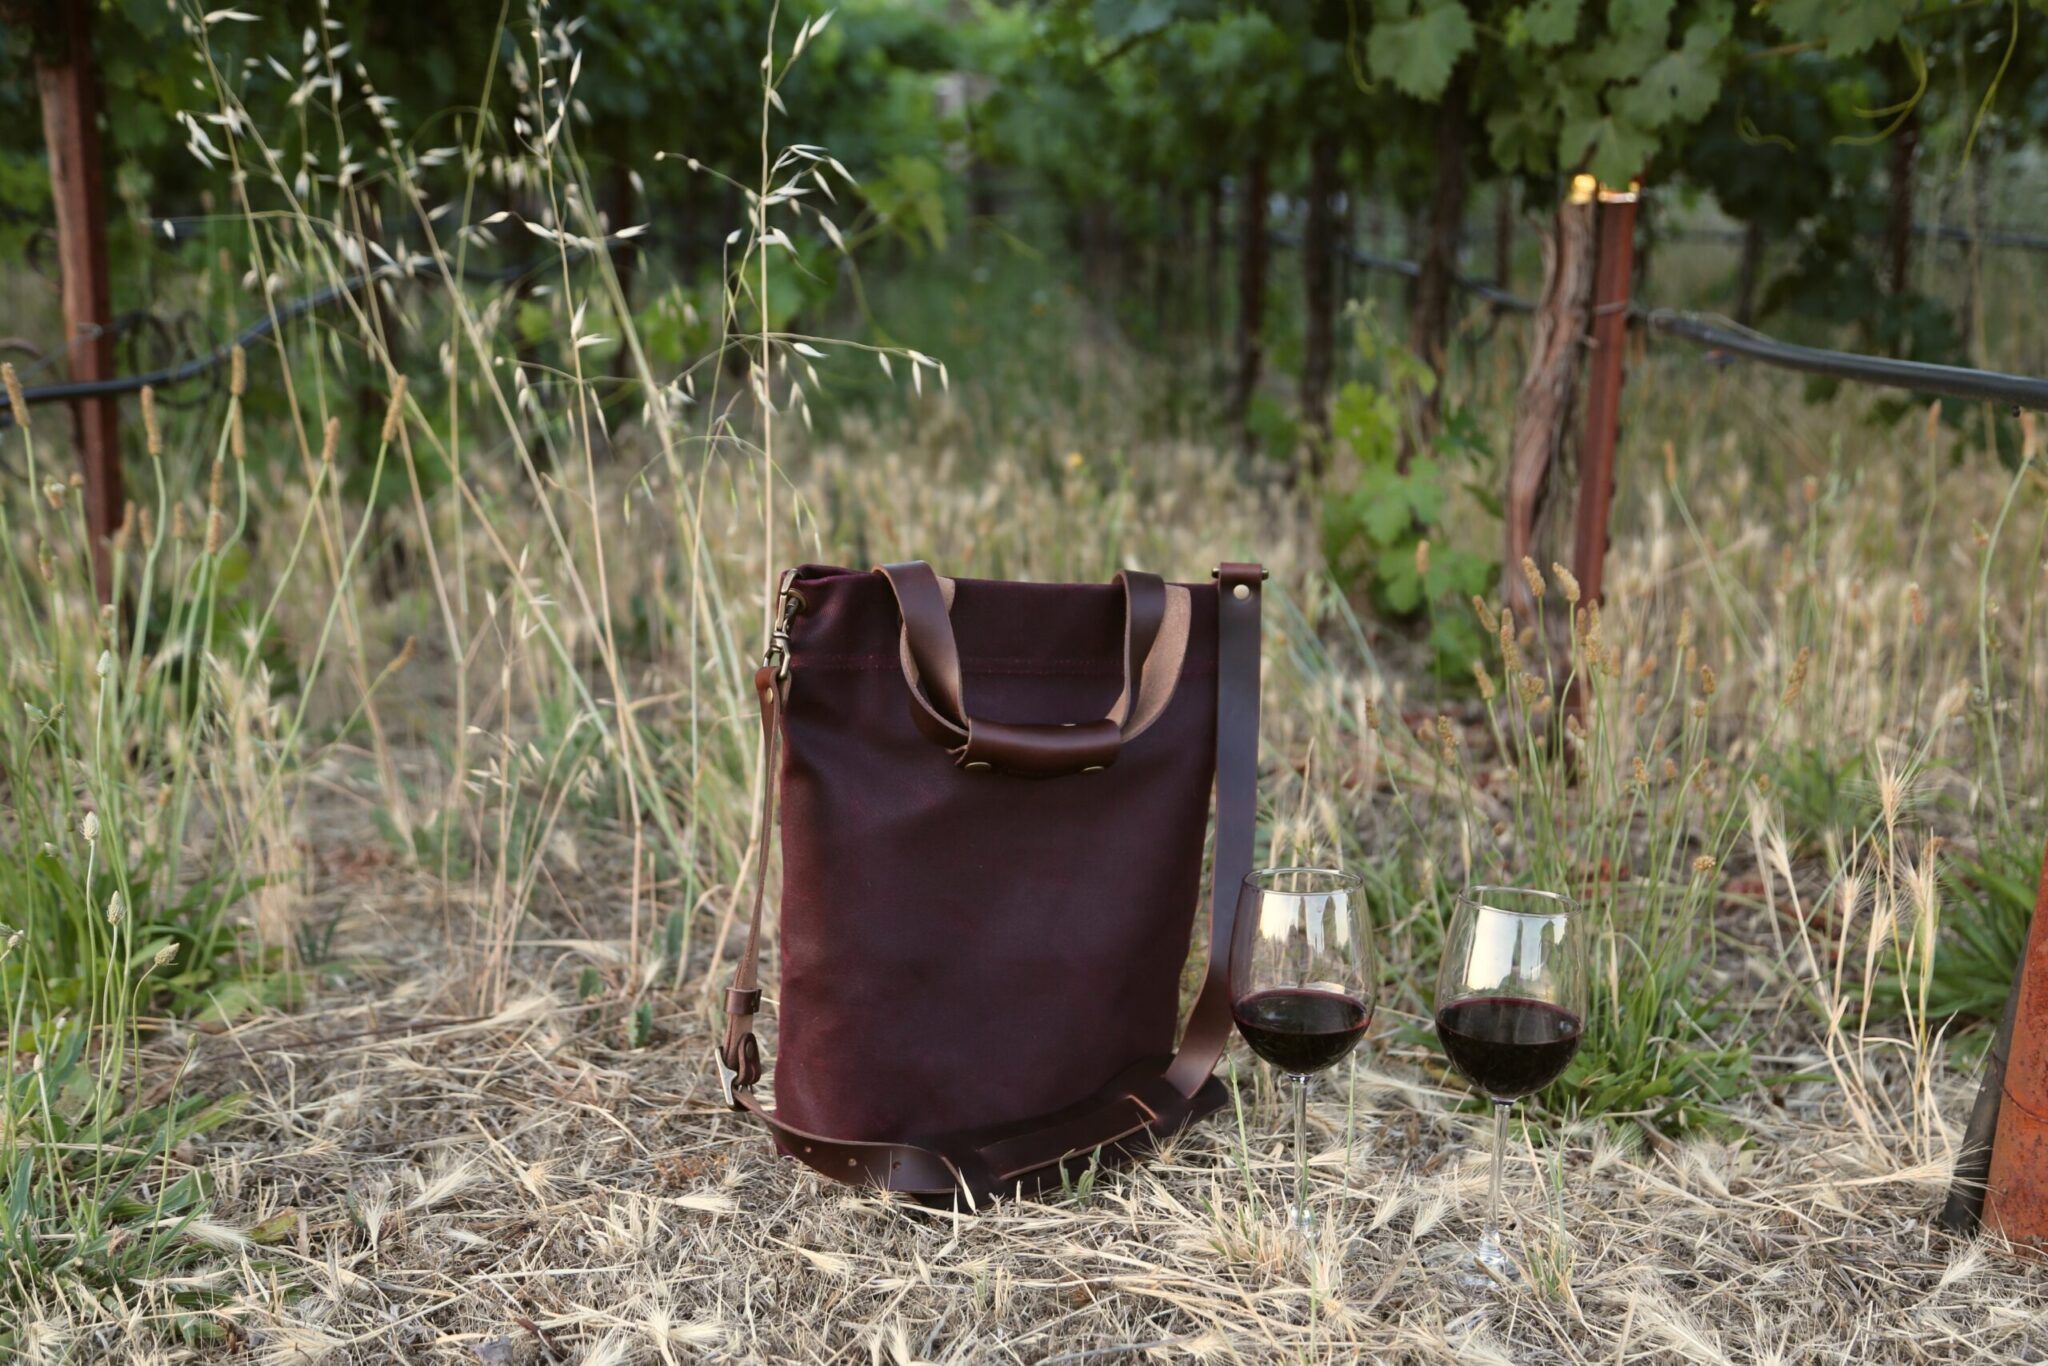 Carrying wine into vineyards with tote